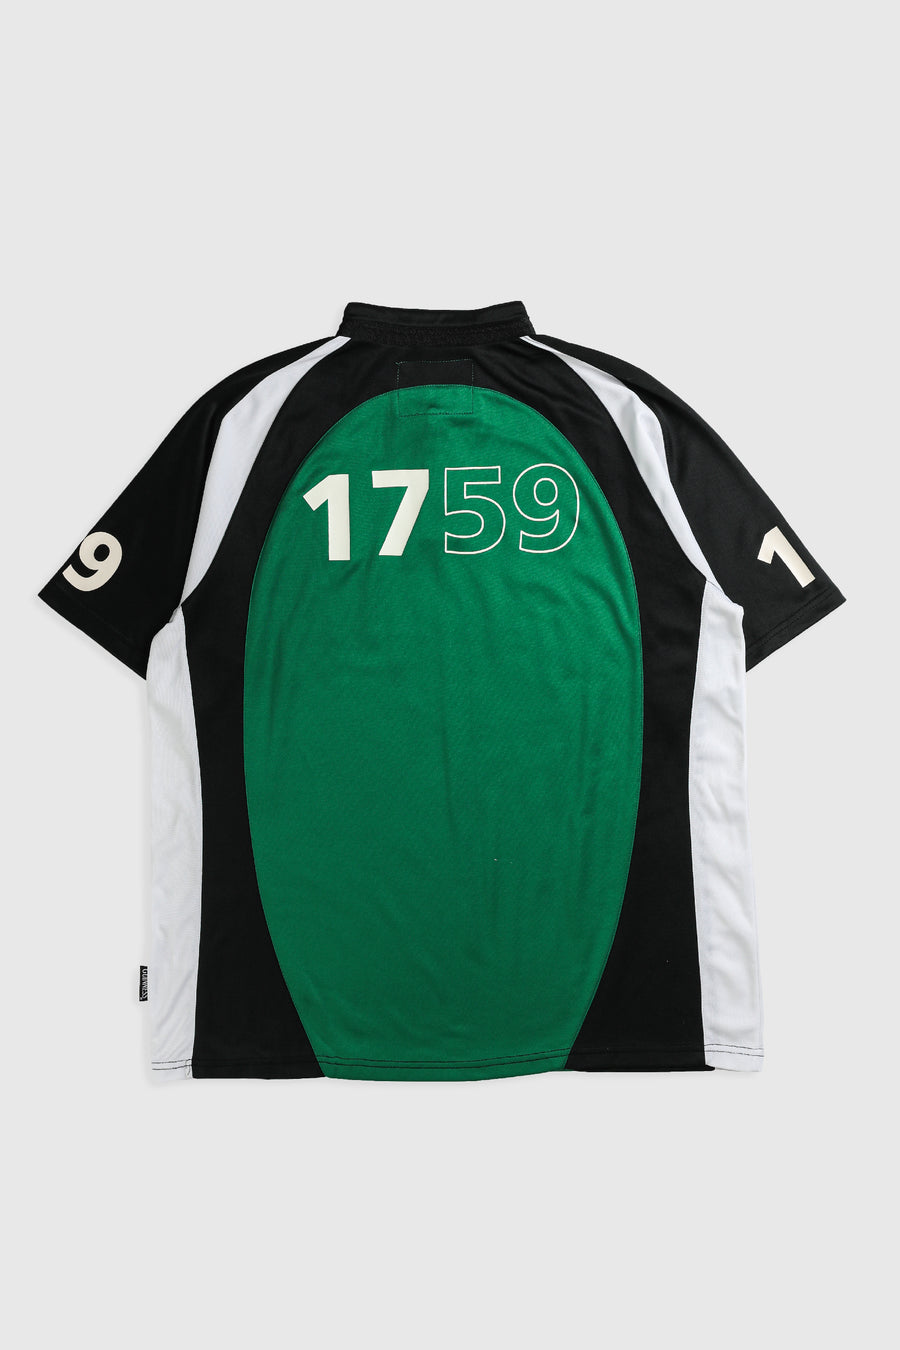 Vintage Guiness 1759 Rugby Jersey - XL